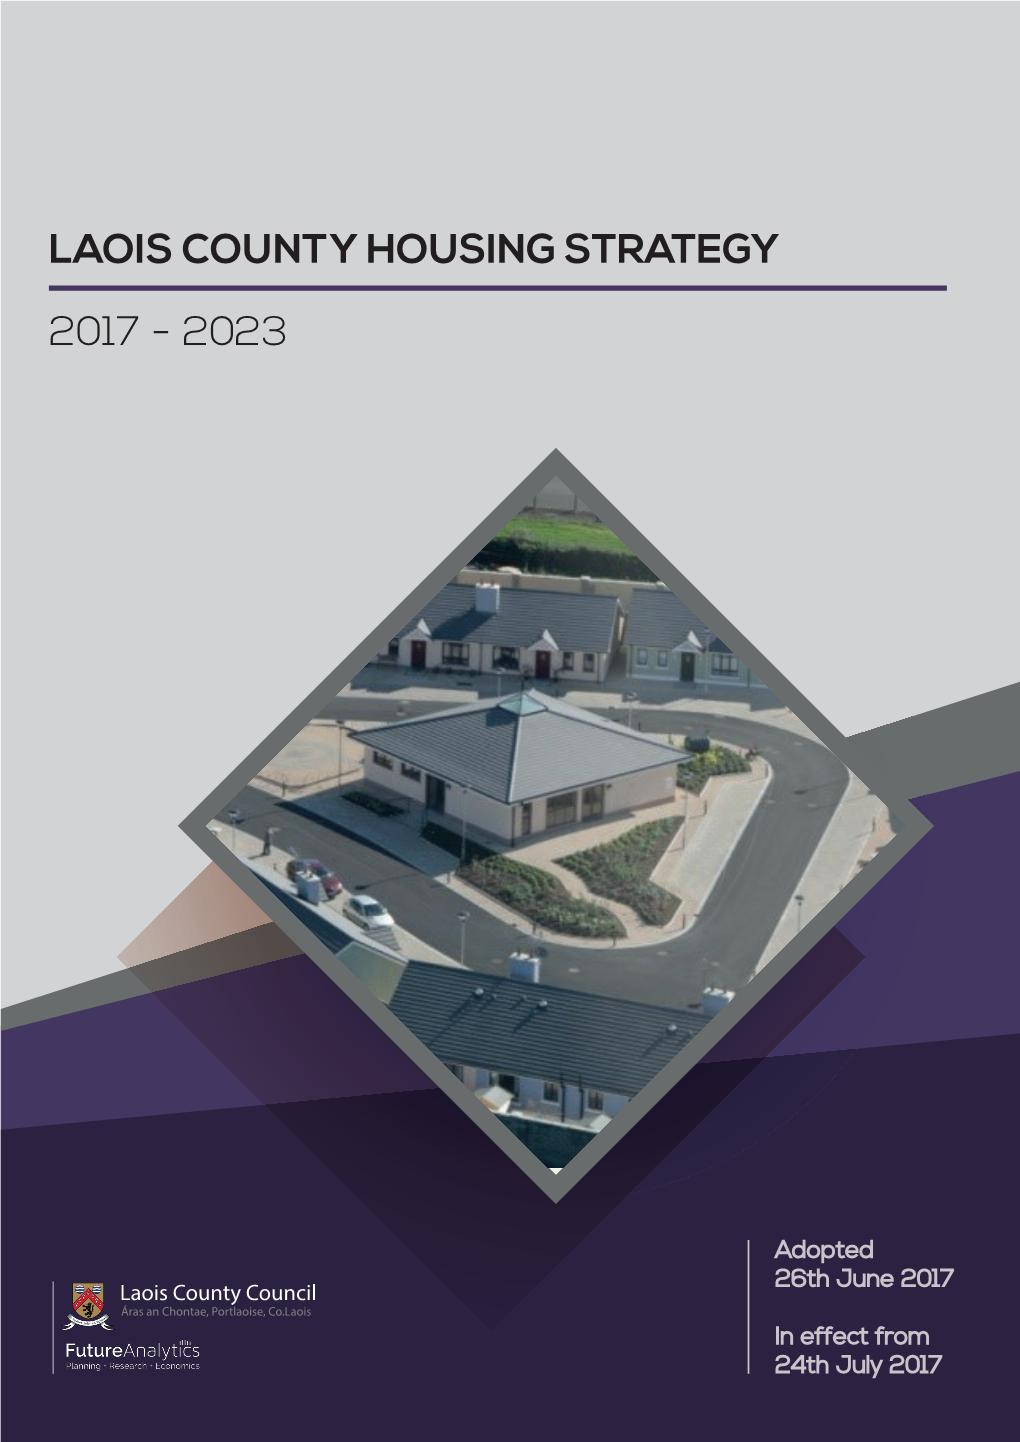 Laois County Housing Strategy 2017